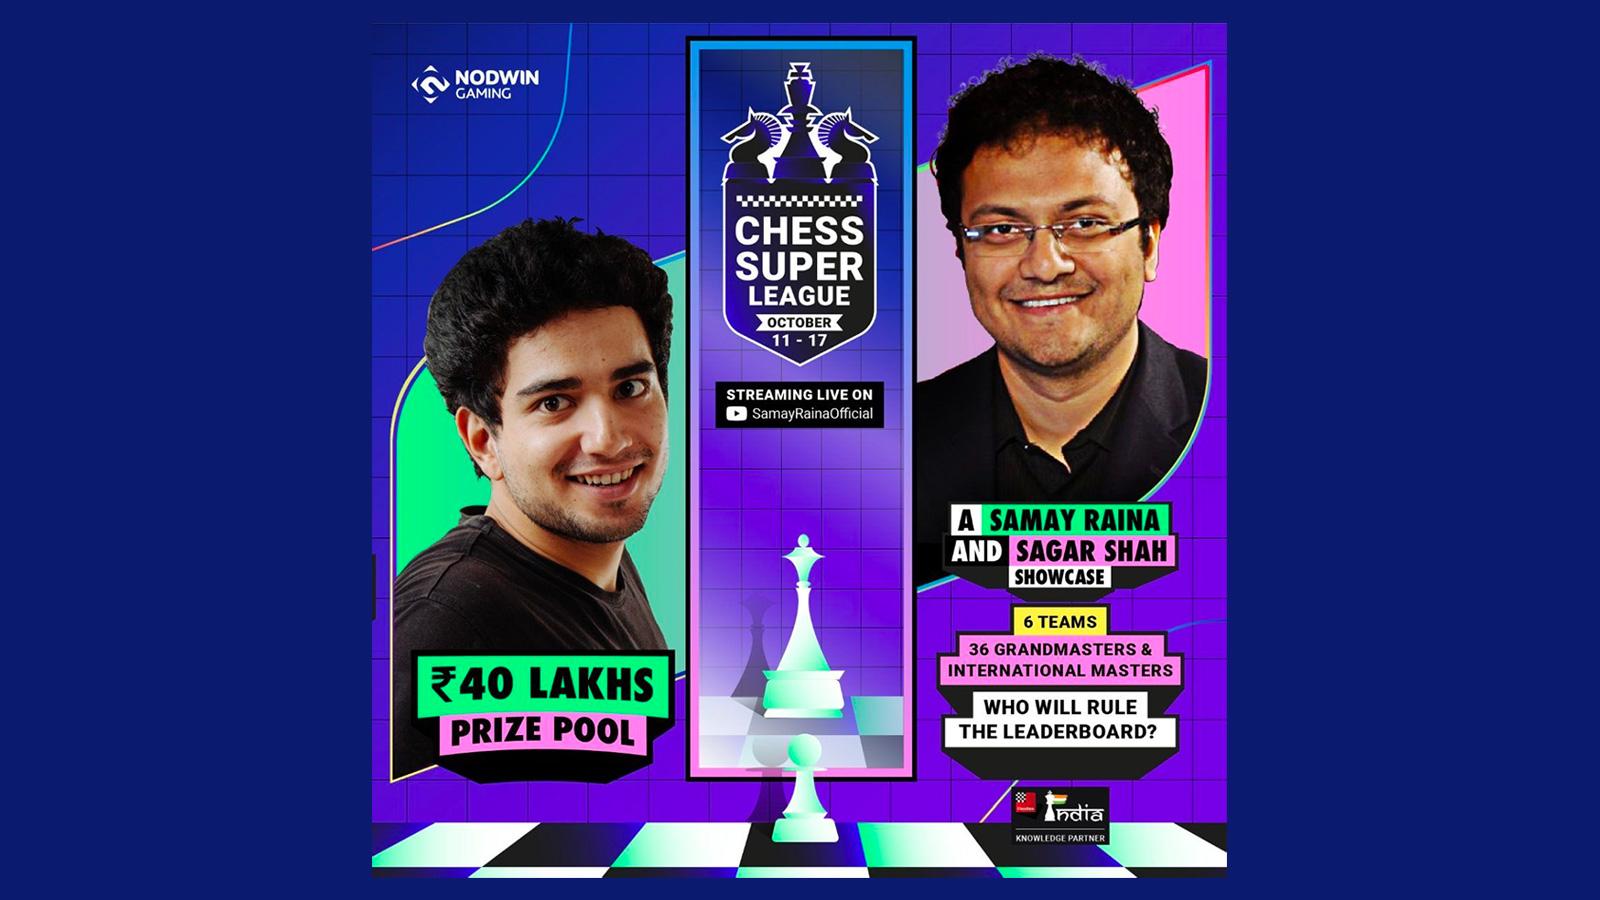 Chess Super League To Start October 11 On Chess.com